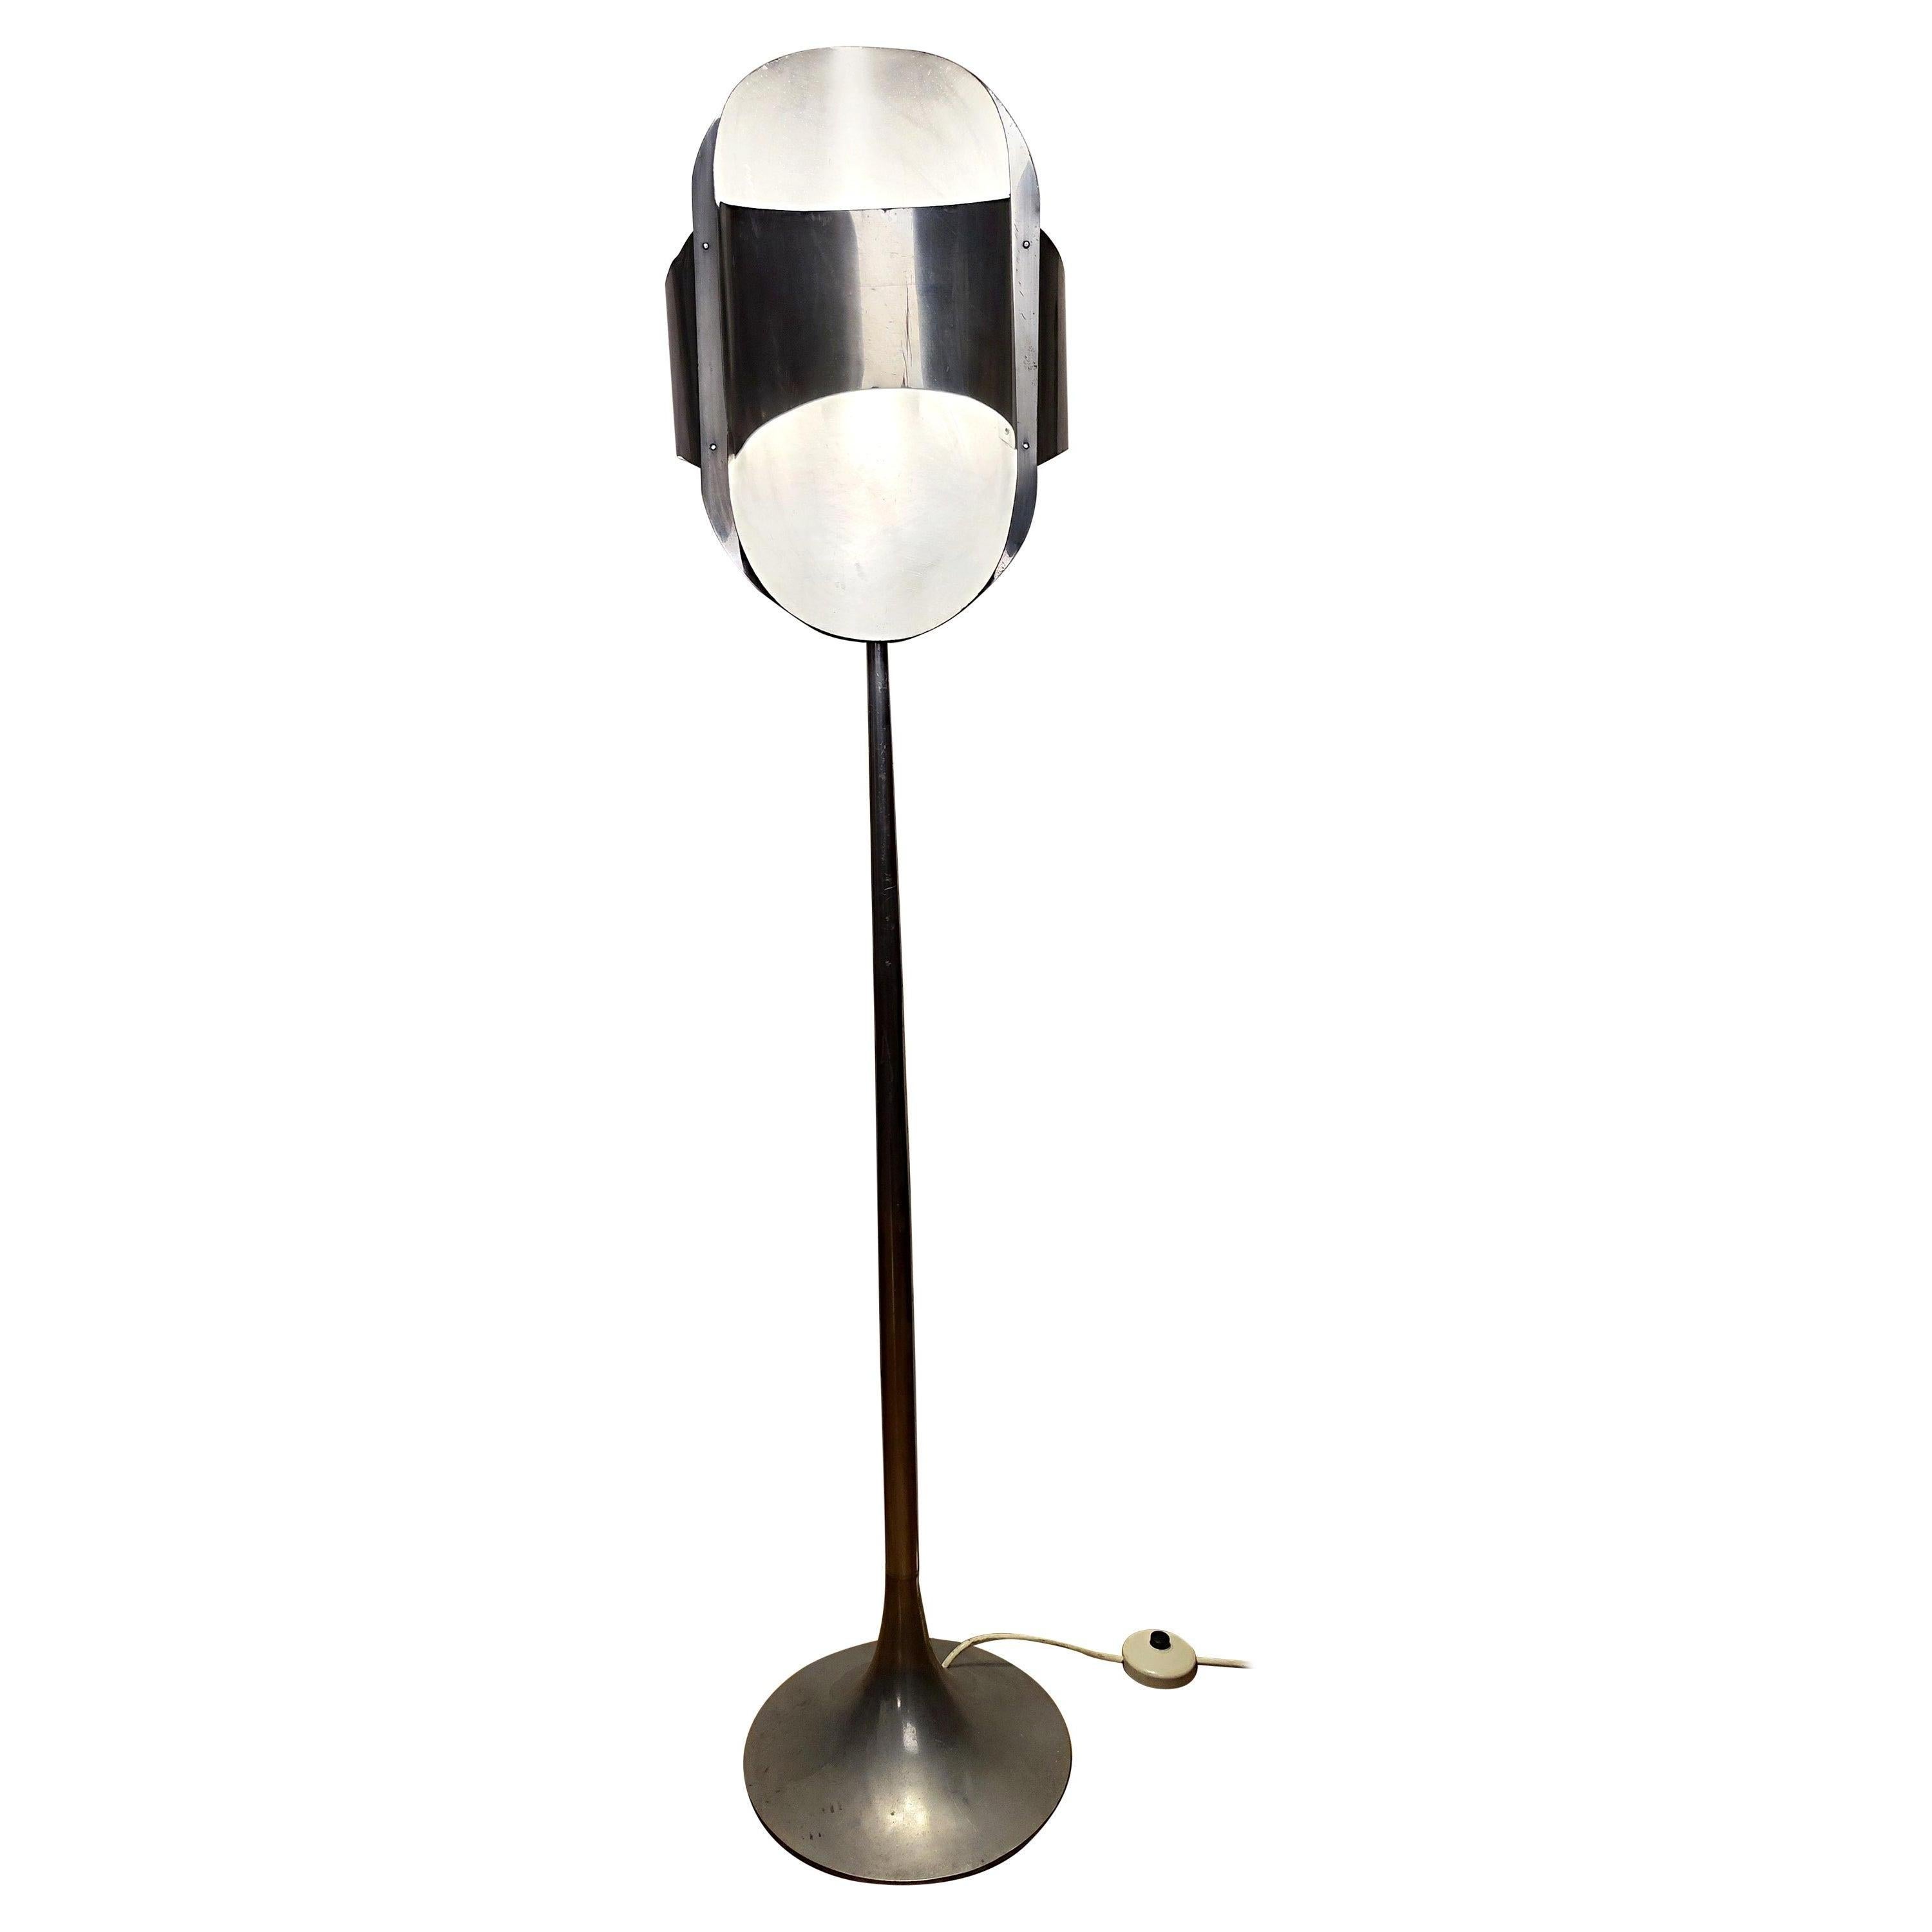 Floor lamp may attributed to Roger Tallon - 1965-1970 - France